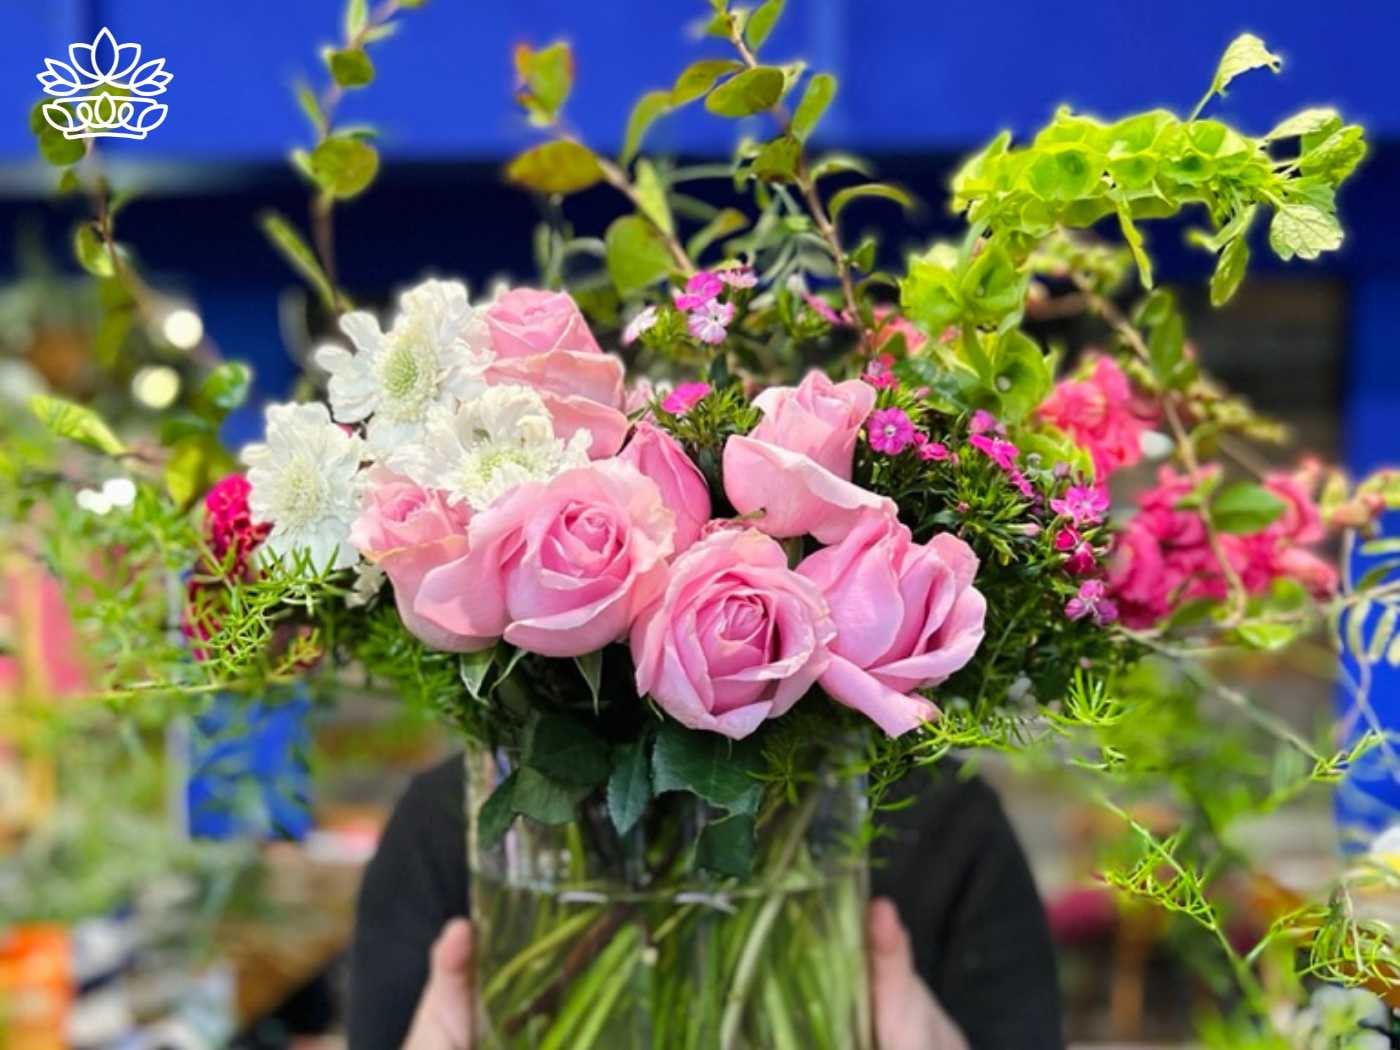 A bouquet of soft pink roses and vibrant greenery, ready for efficient delivery, perfect for birthdays or browsing in the business shop at Fabulous Flowers and Gifts.